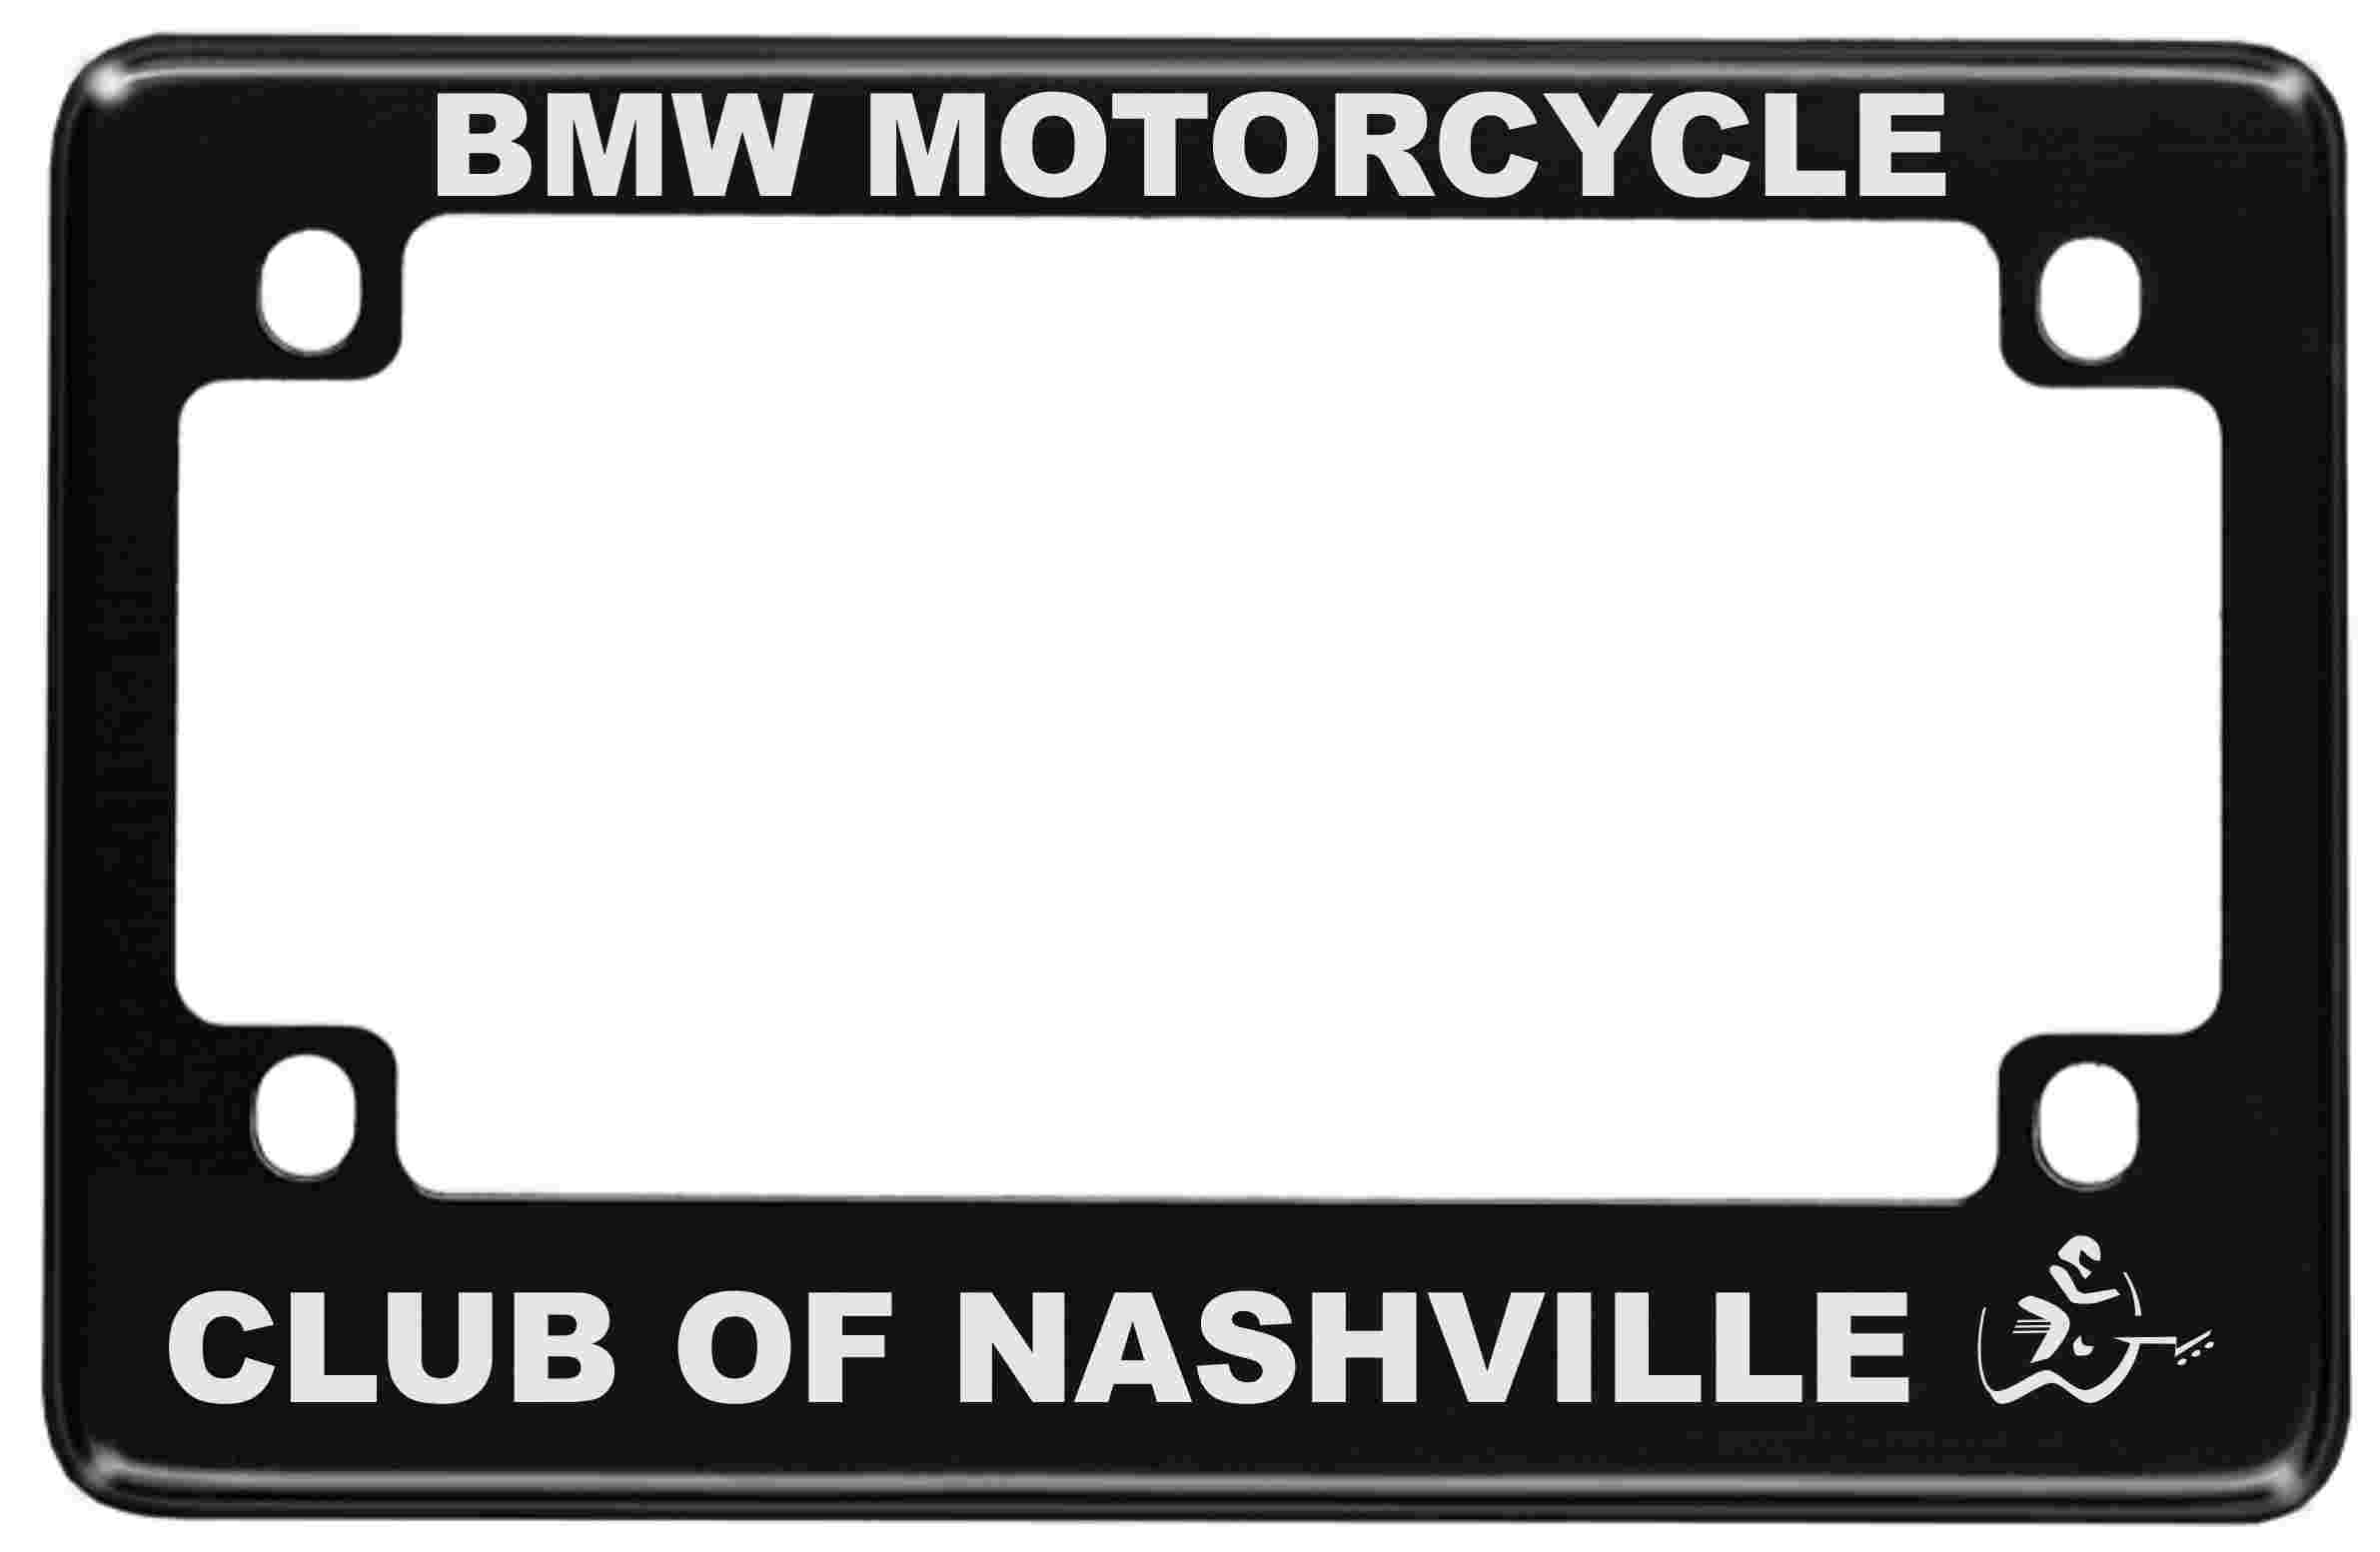 BMW Motorcycle Club of Nashville - Custom Motorcycle License Plate Frame